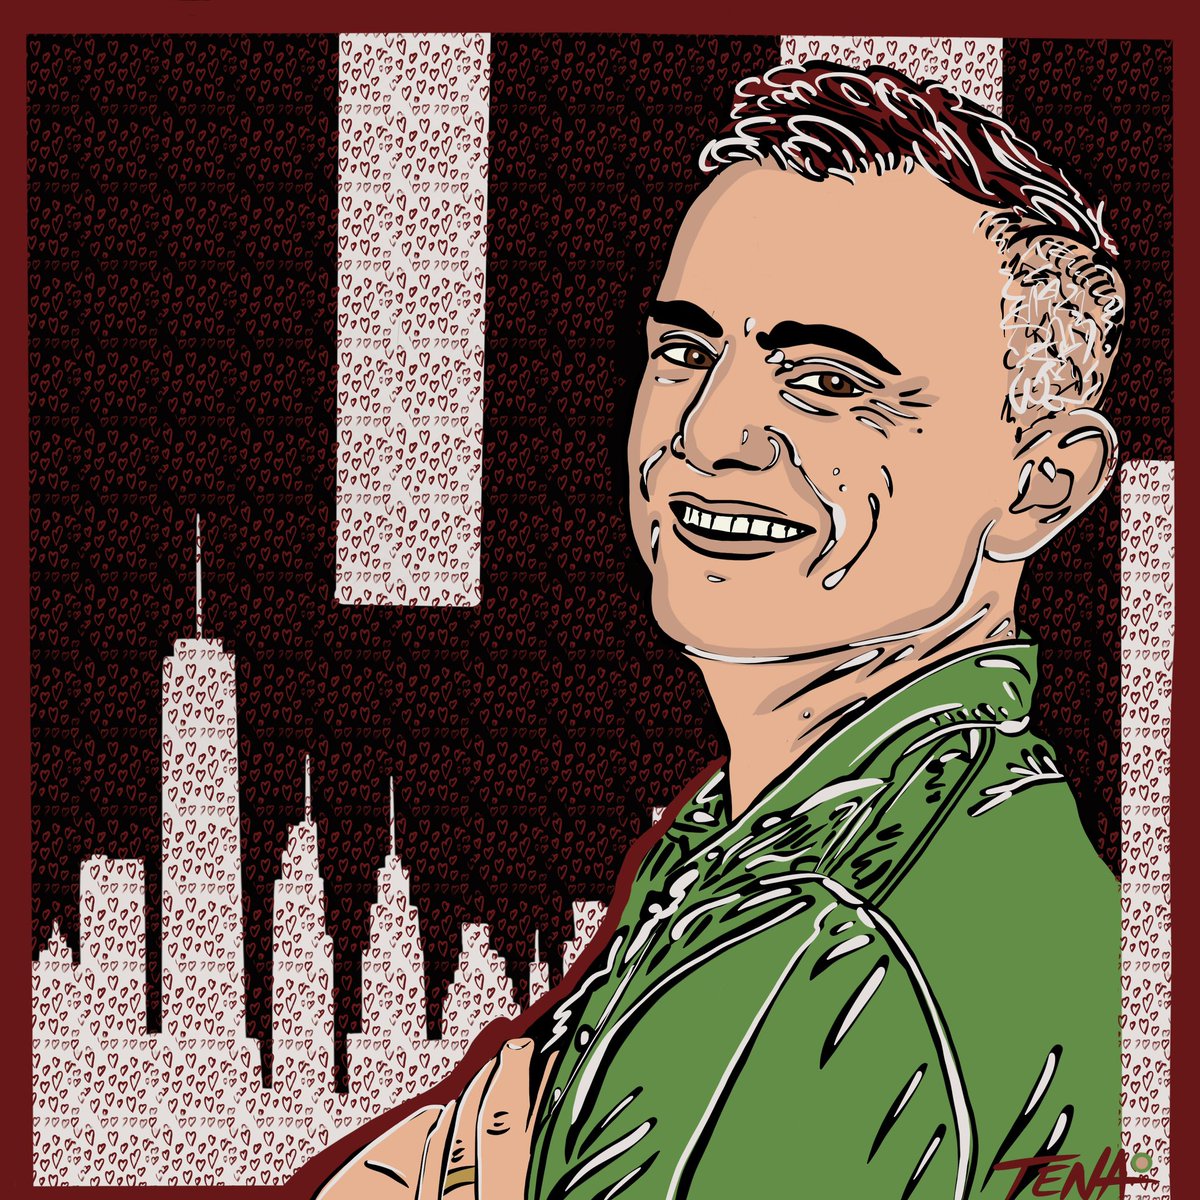 206/365 of my visual application for @garyvee and @veefriends 

There’s nothing like a big city with a big heart ❤️ Have an awesome day and I love you ALL!! 💚🙏🤟 
#365PortraitsOfGary #ArtByTena #digitalartist #artist #veefriends #nft #drawing #web3 #garyvee #NYC